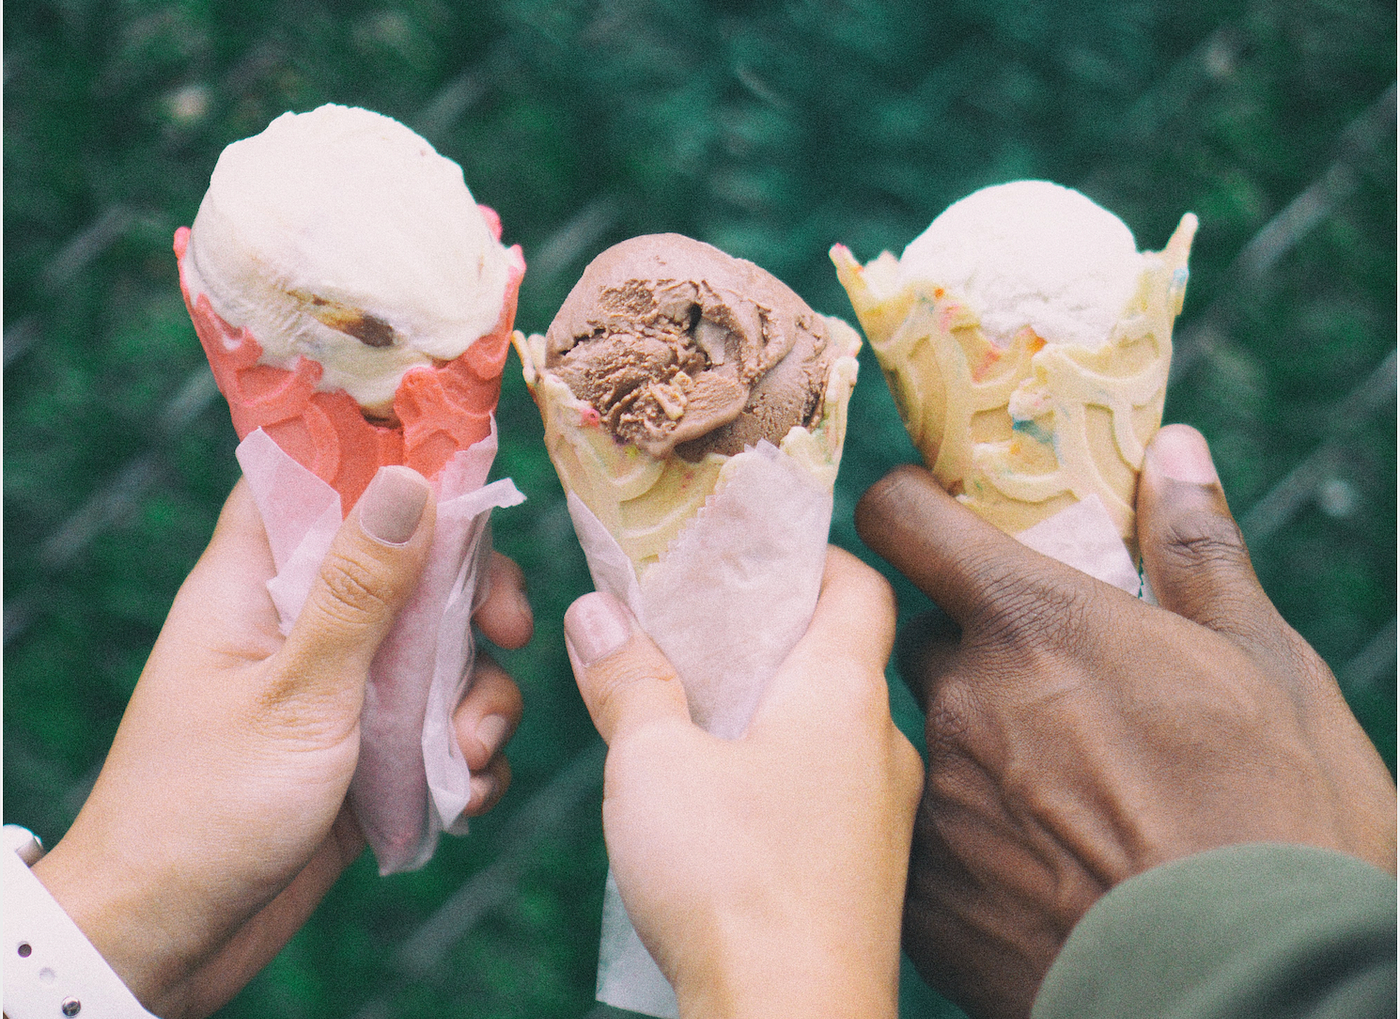 A Guide To Ice Cream and Gelato Stabilizers and Emulsifiers